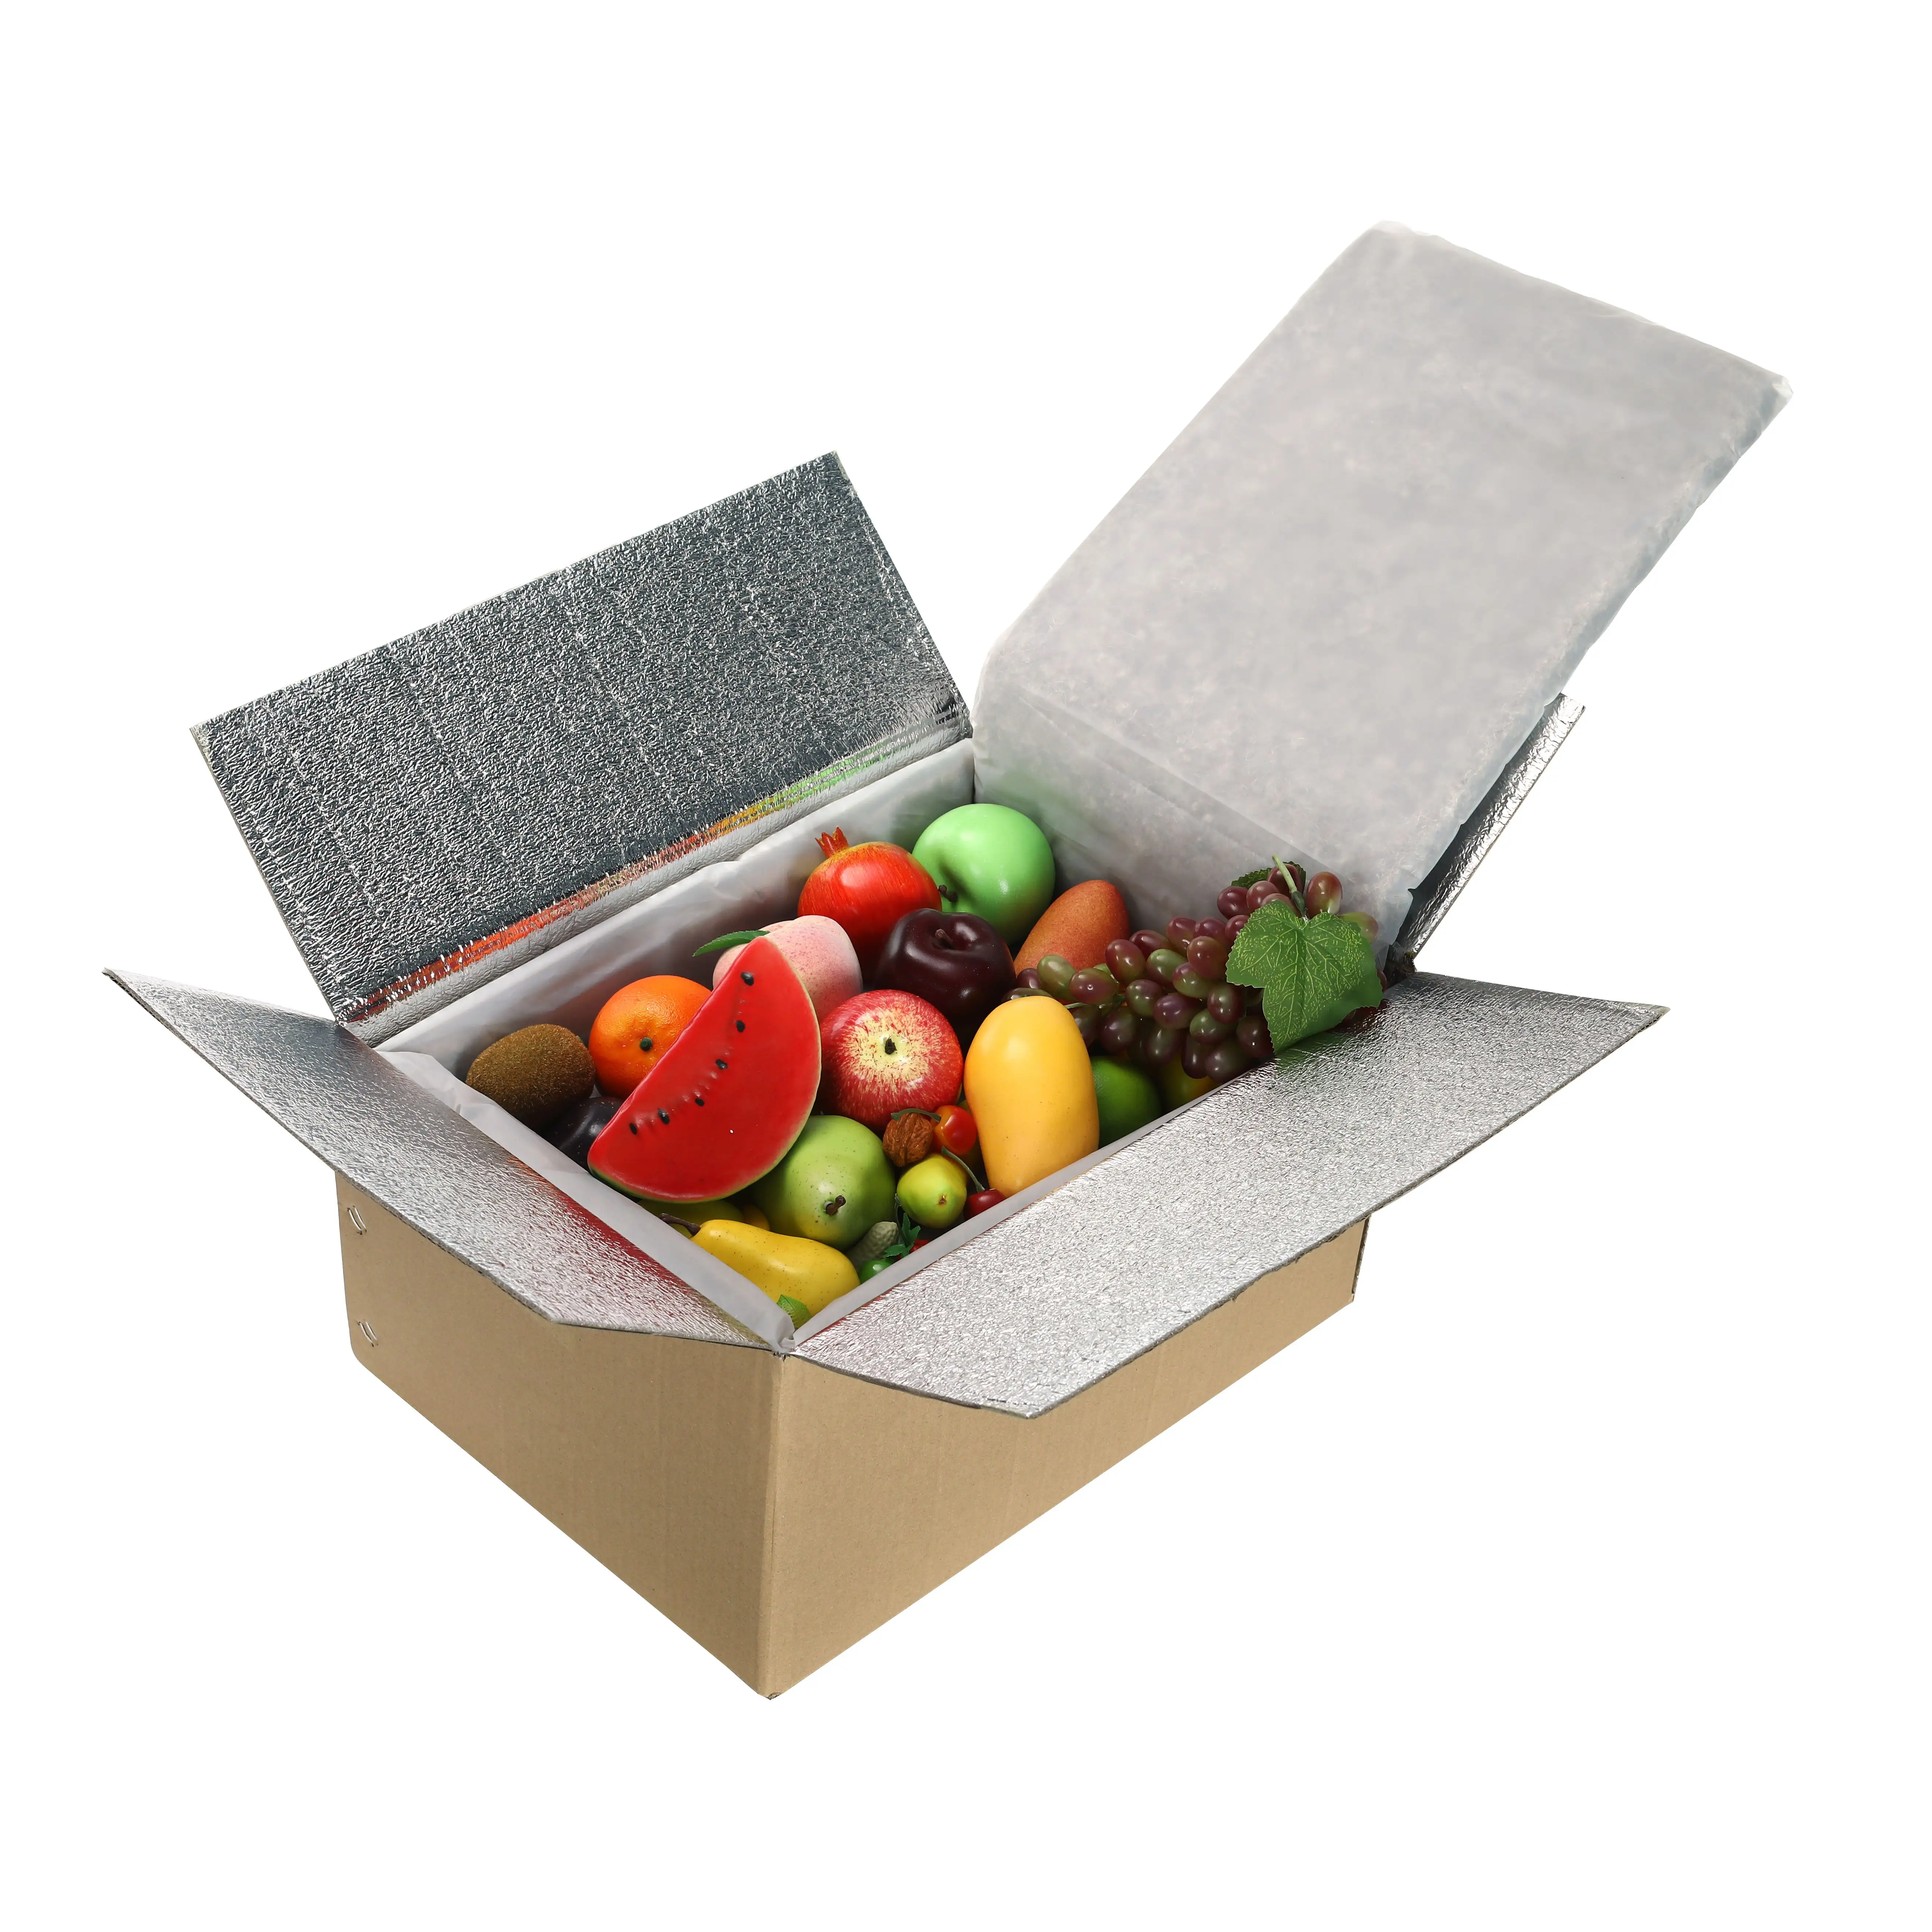 Insulated Liner For Boxes Thermal Insulated Cold Food Liners For Shipping Carton Boxes Fresh Vegetable Transportation